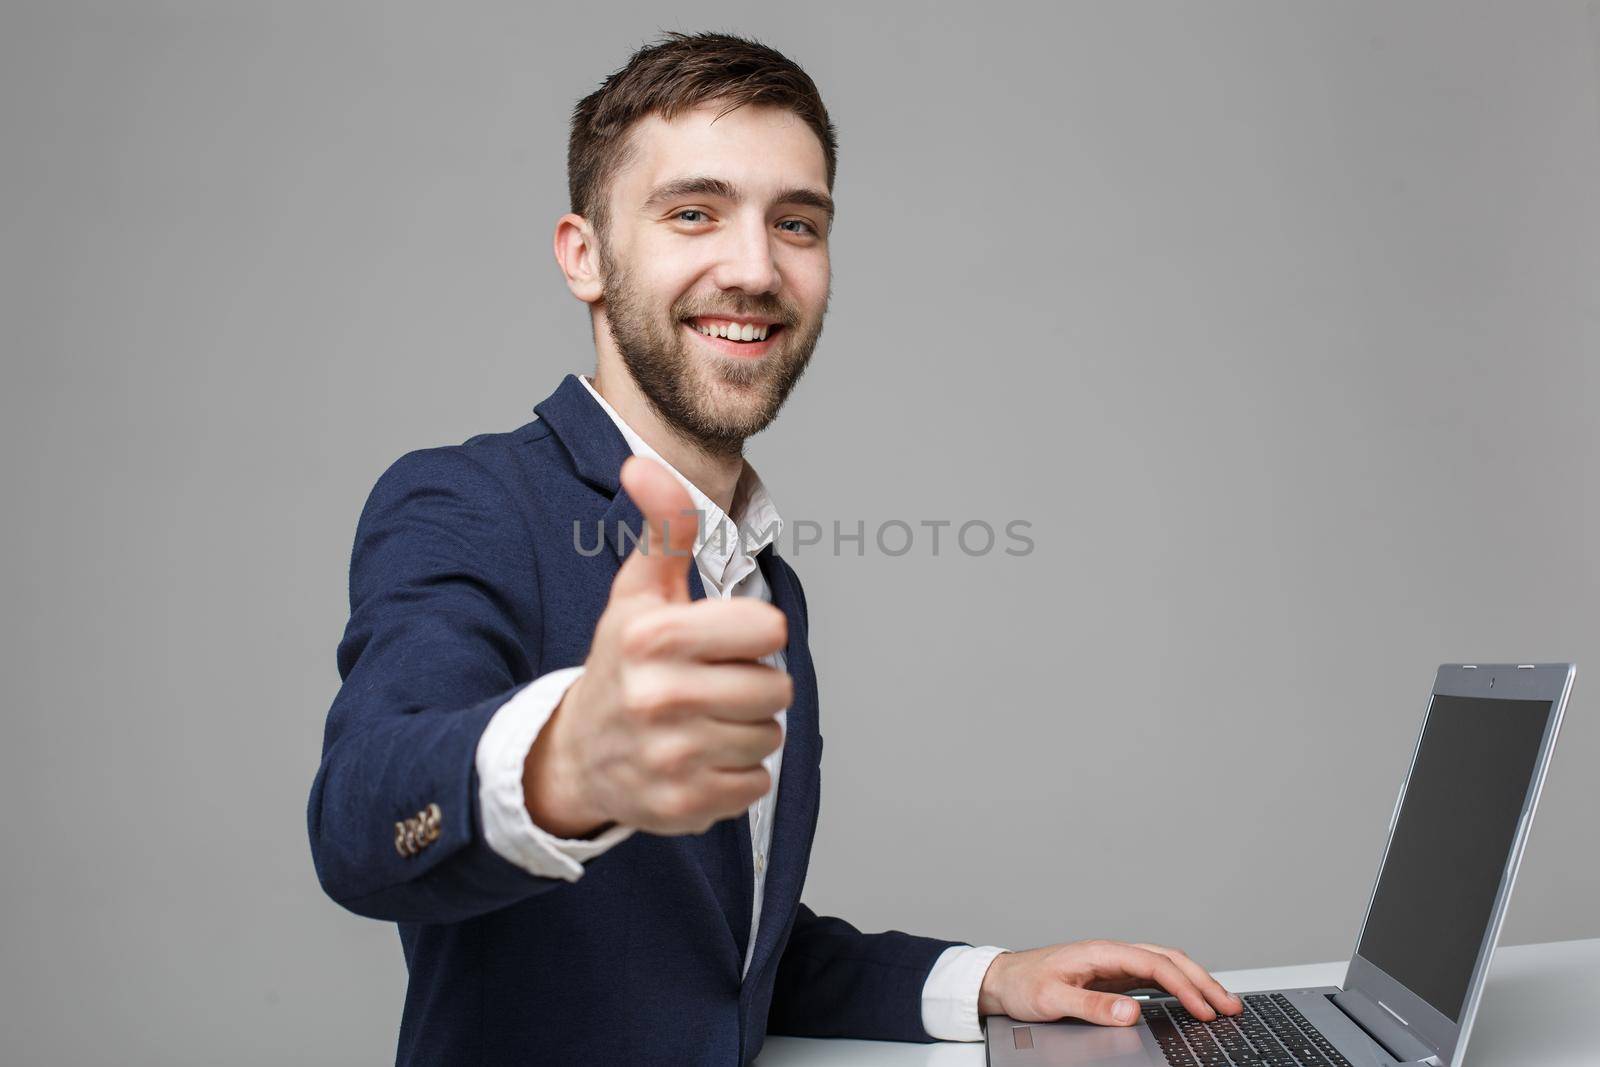 Business Concept - Portrait Handsome Business man showing thump up and smiling confident face in front of his laptop. White Background.Copy Space.